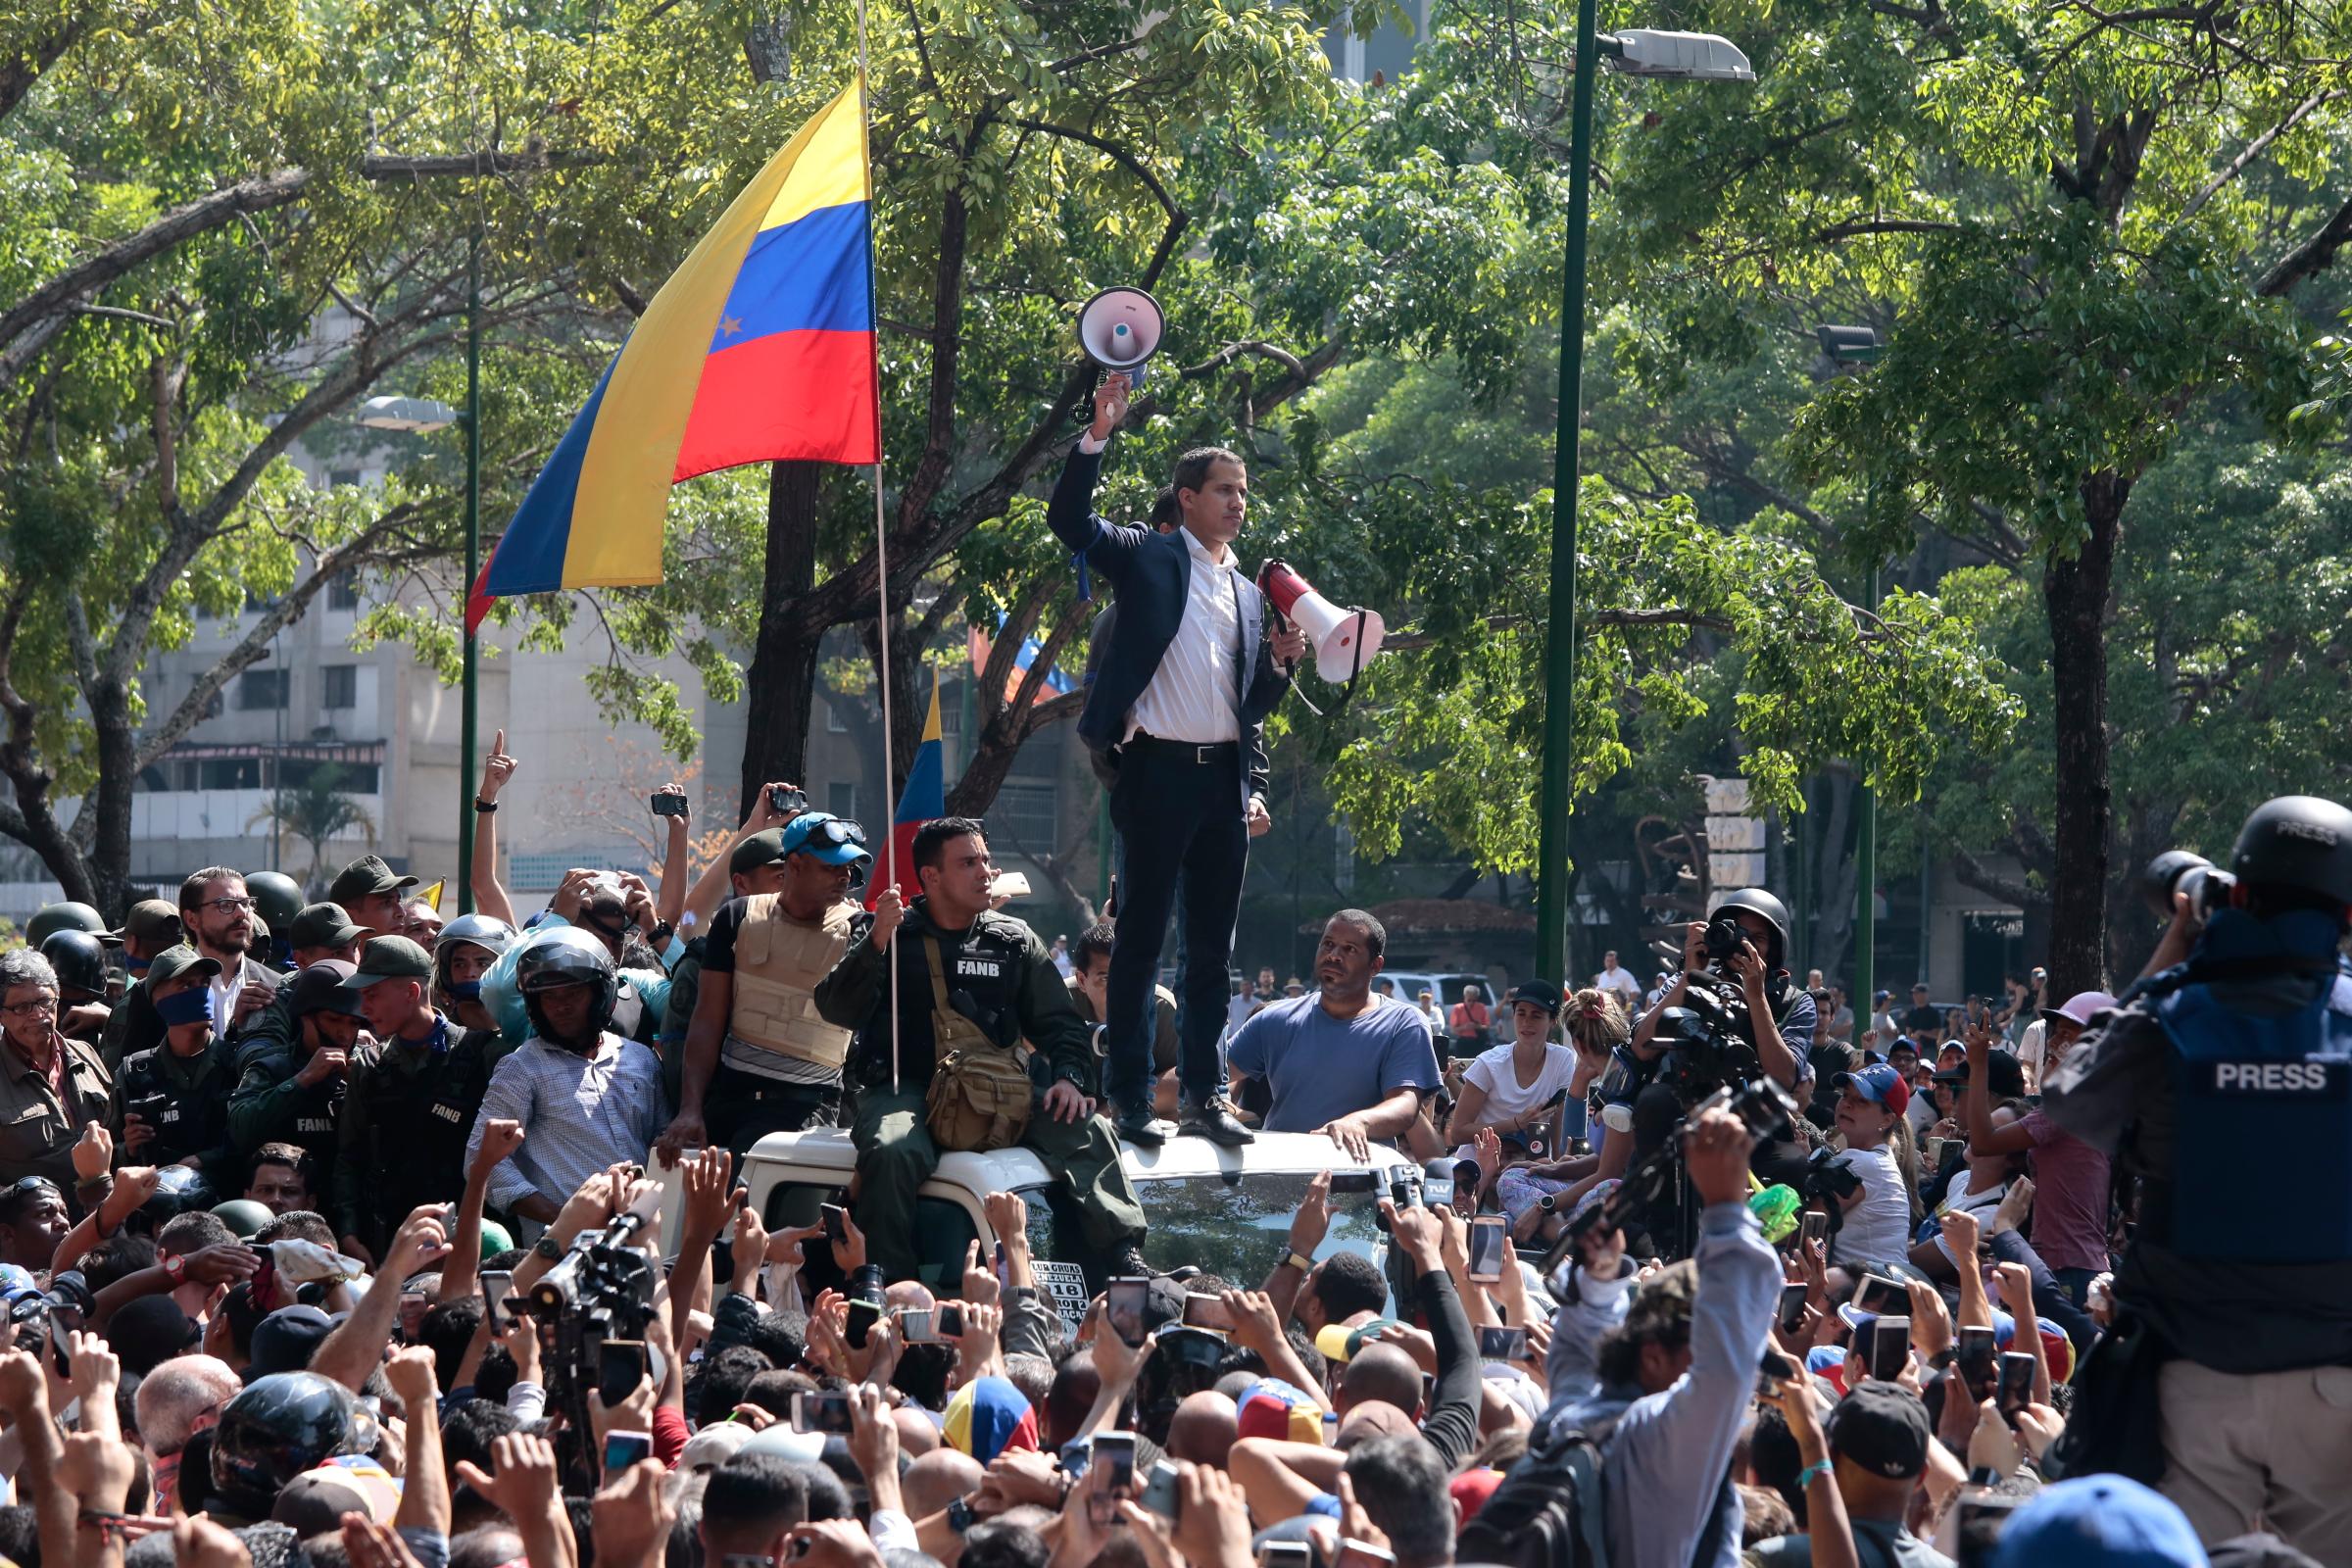 Juan Guaido, self-proclaimed interim president of Venezuela, stands with two megaphones in his hands surrounded by soldiers and civilians at Plaza Altamira